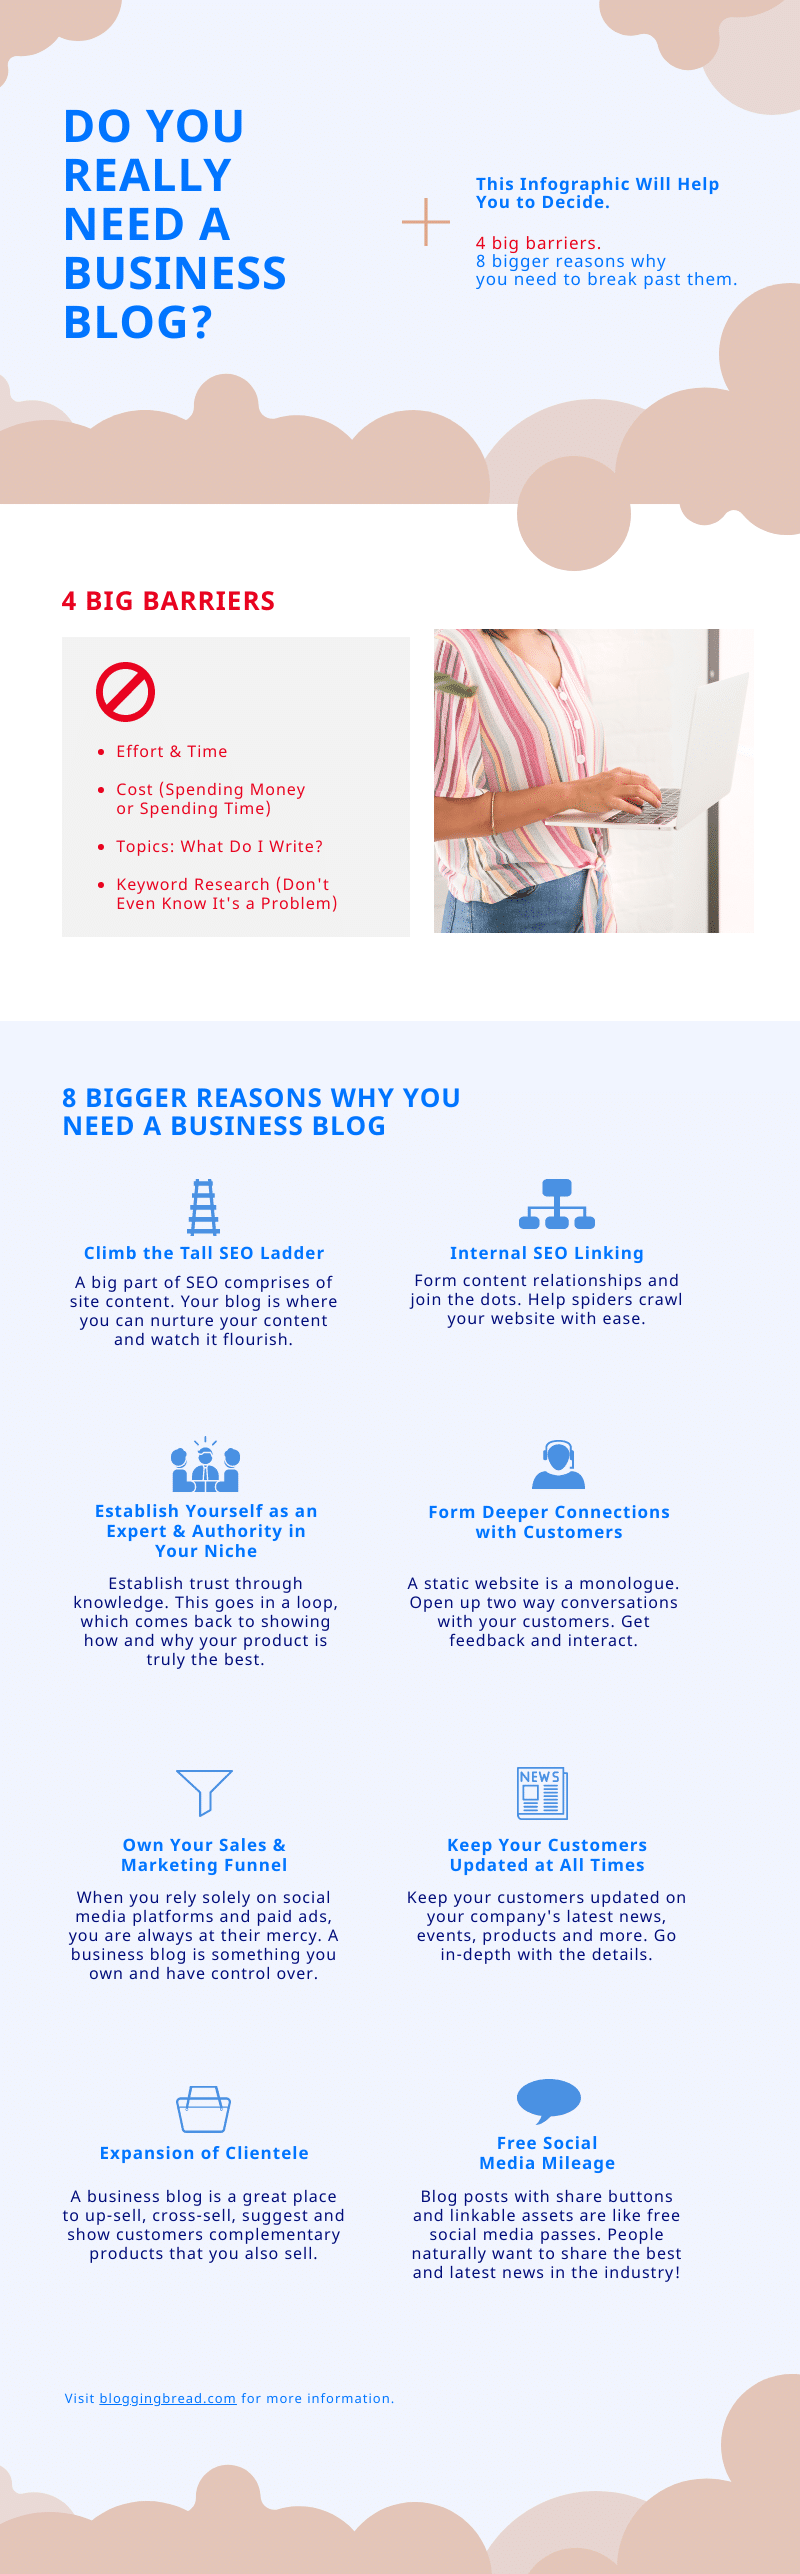 Do You Really Need a Business Blog? This Will Help You Decide. [Infographic]